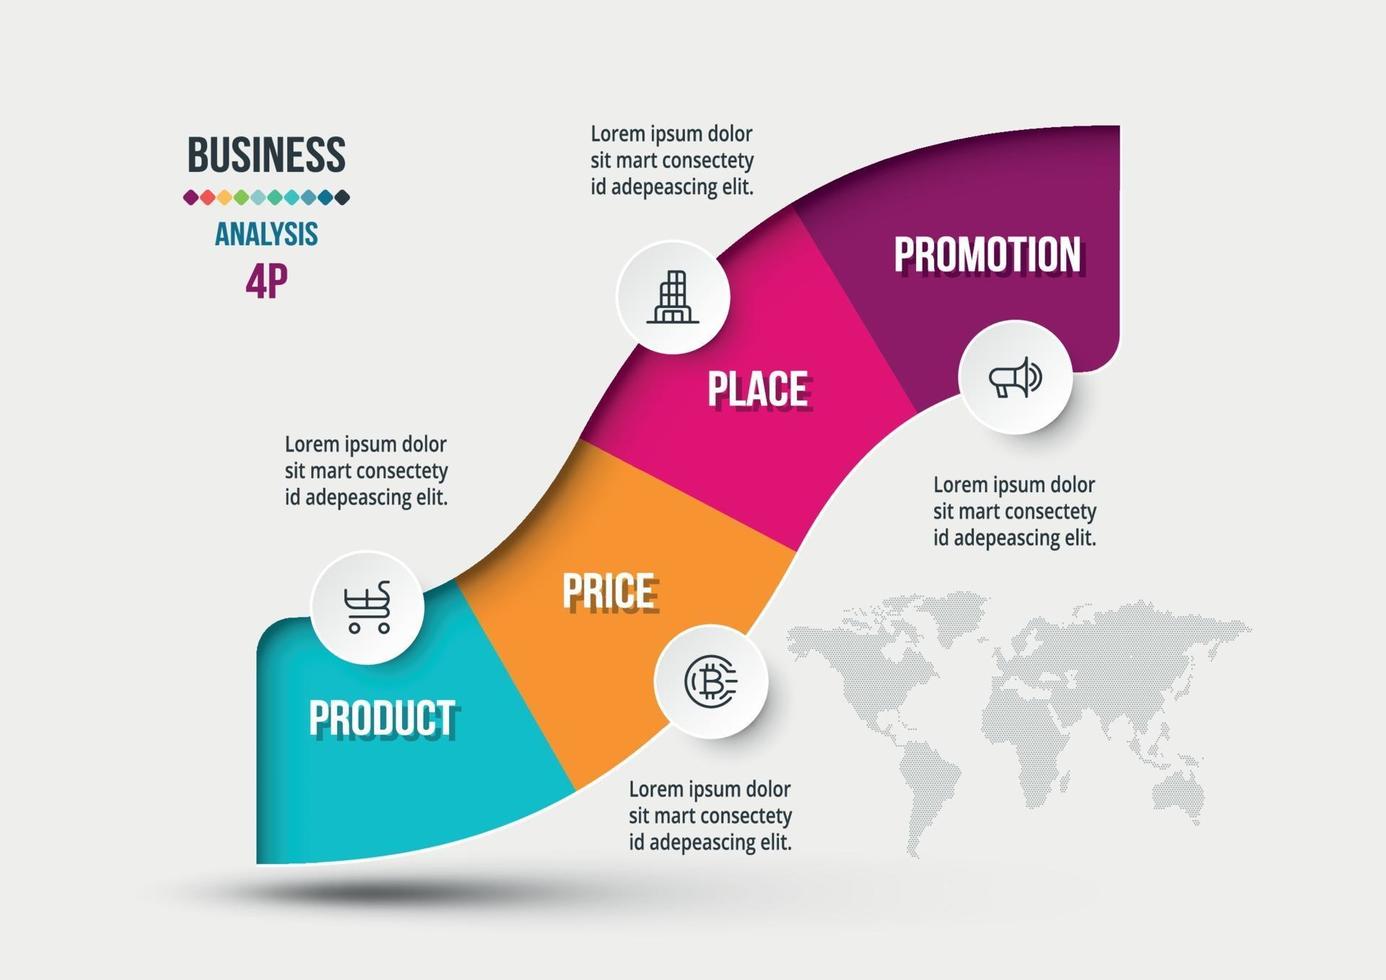 4P analysis business or marketing  infographic template. vector